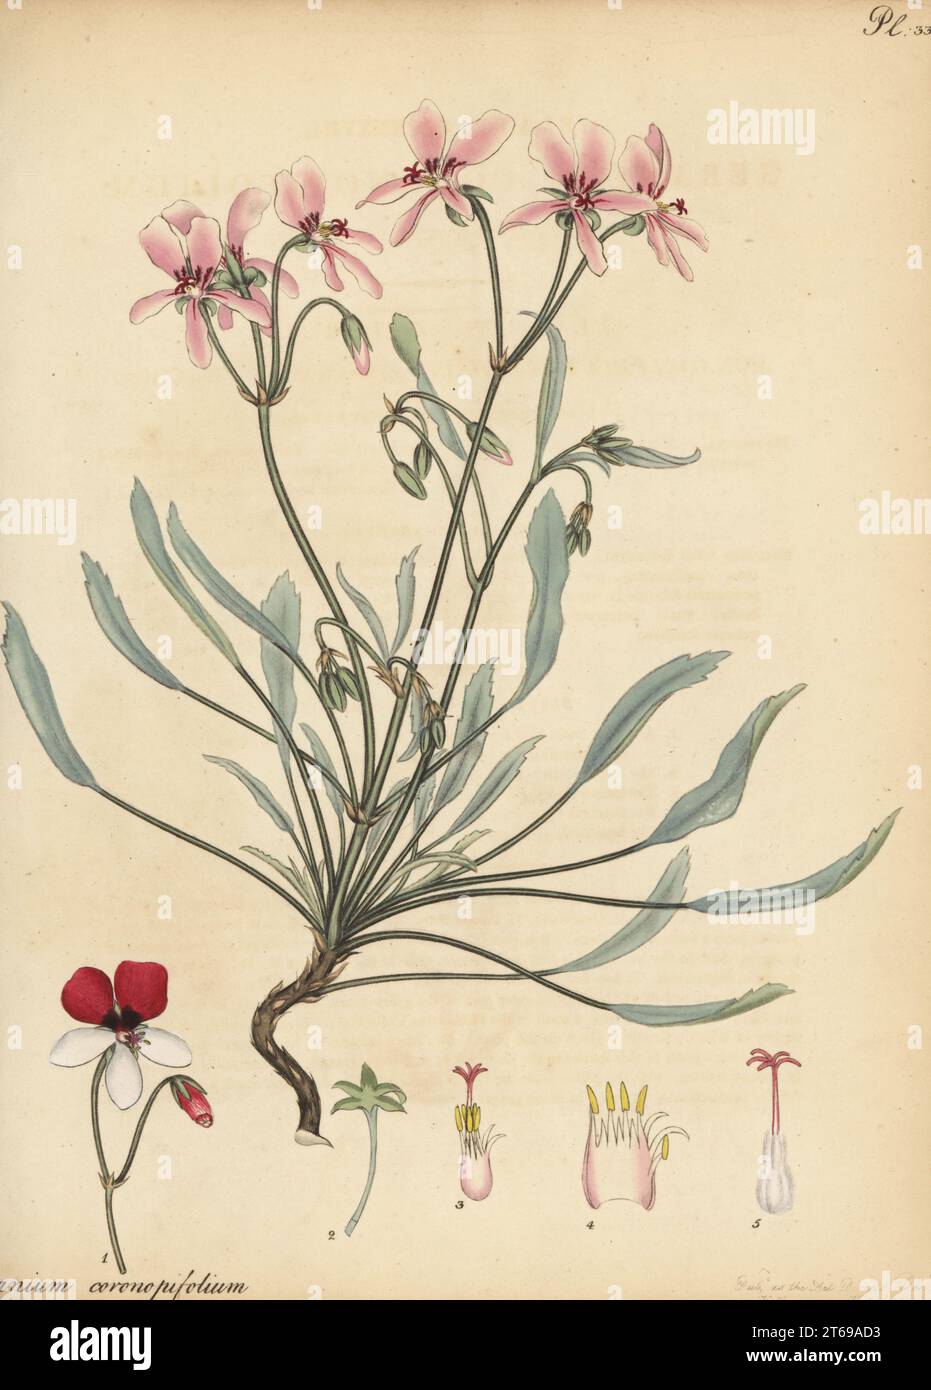 Pelargonium coronopifolium. Buck's-horn-leaved geranium, Geranium coronopifolium. Introduced to Kew Gardens by Francis Masson, figured from the George Hibbert collection. Copperplate engraving drawn, engraved and hand-coloured by Henry Andrews from his Botanical Register, Volume 5, self-published in Knightsbridge, London, 1803. Stock Photo